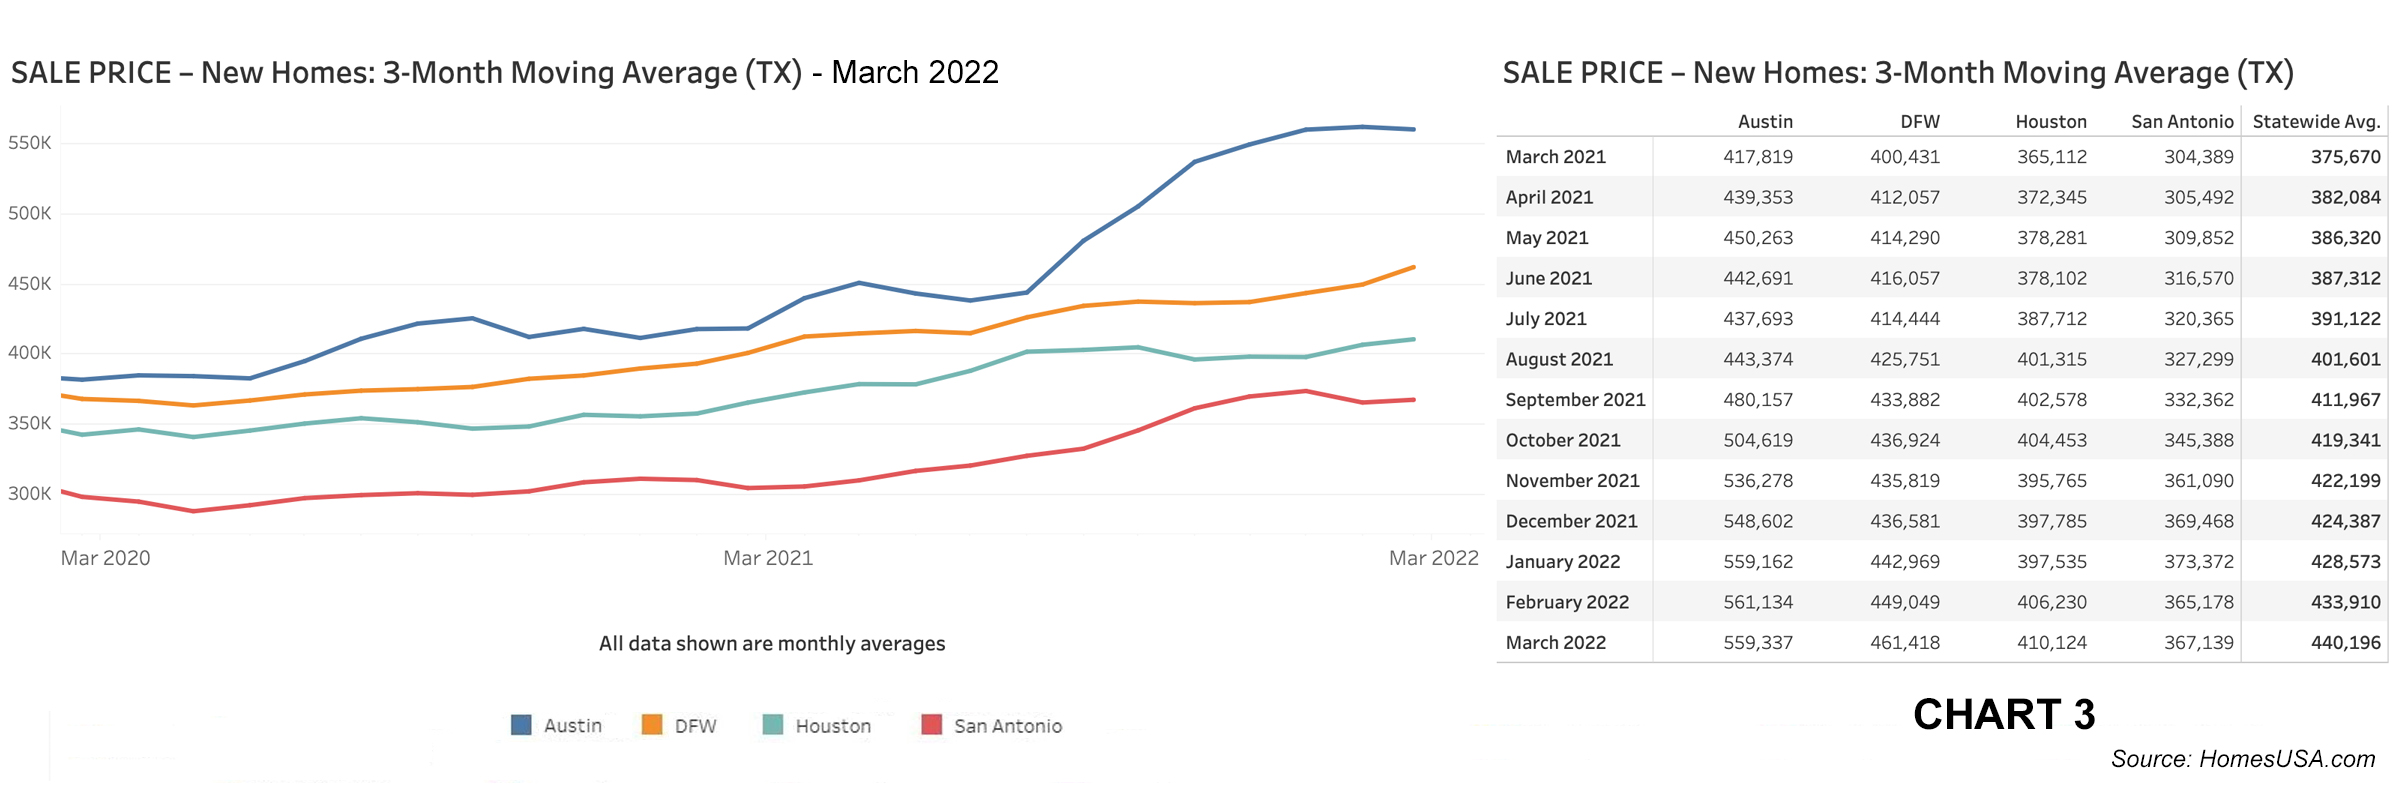 Chart 3: Texas New Home Sales Prices – March 2022